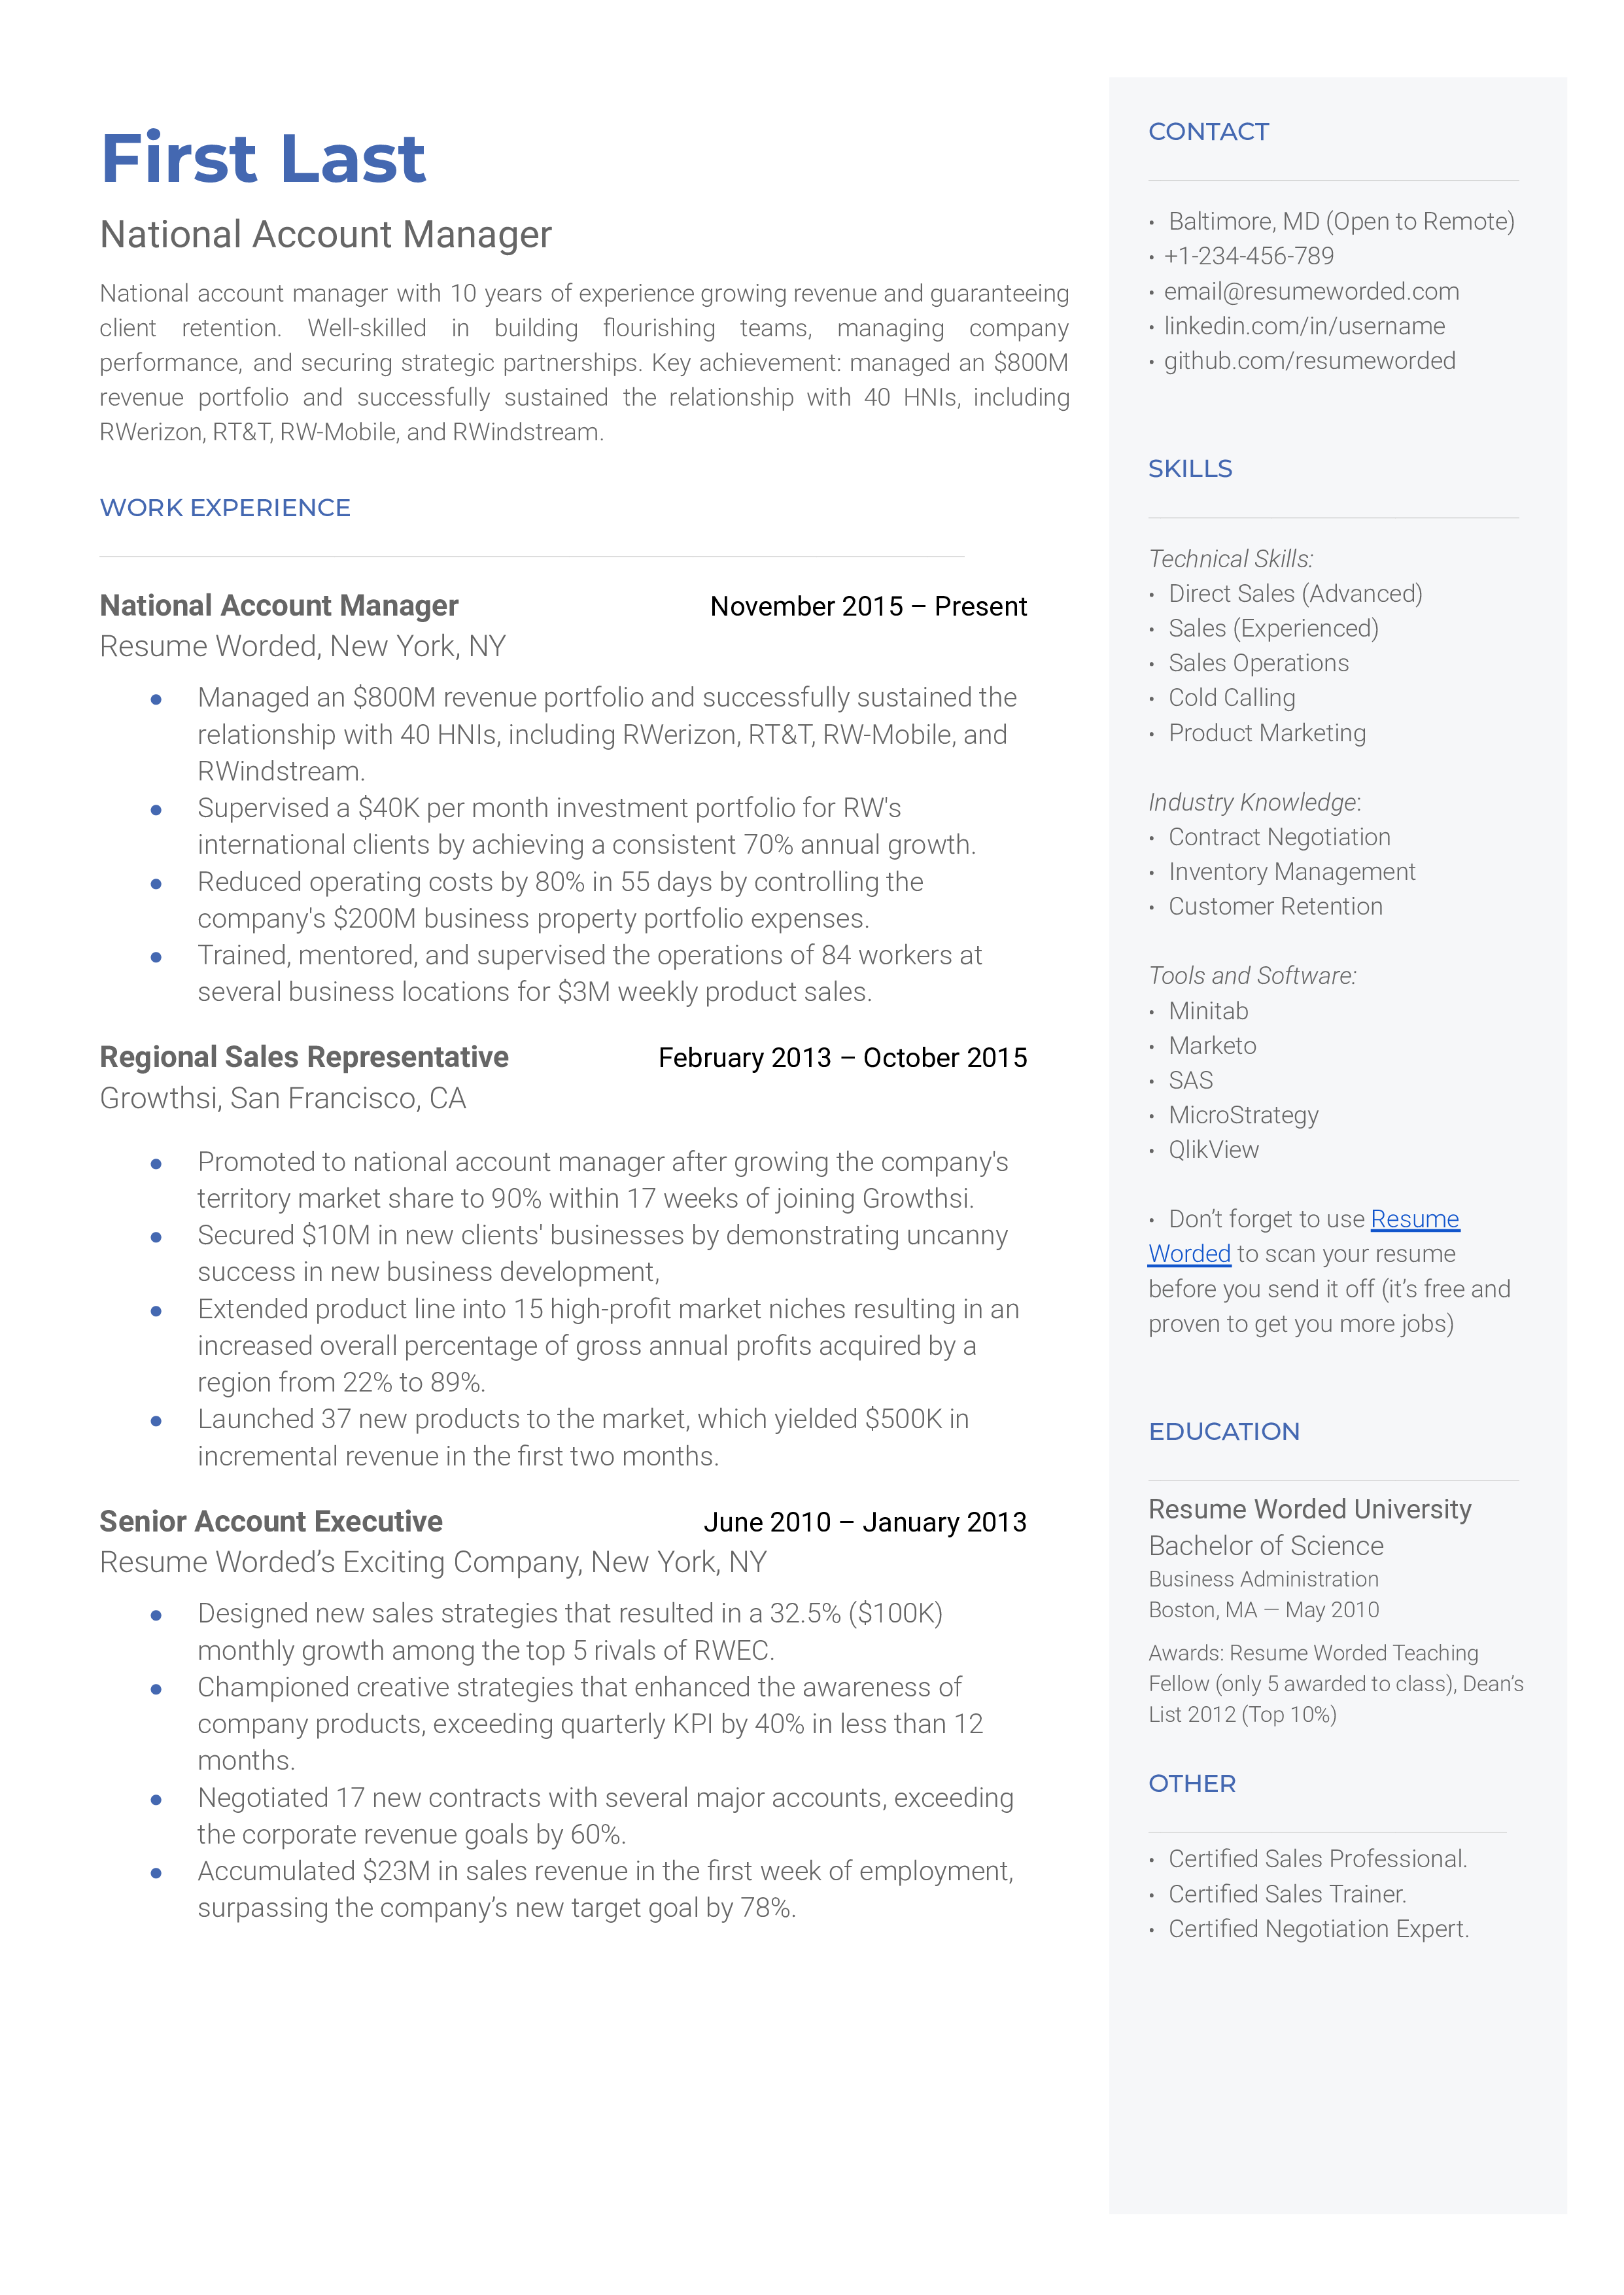 A national account manager resume sample that highlights the applicant’s strong sales background and relevant certifications.